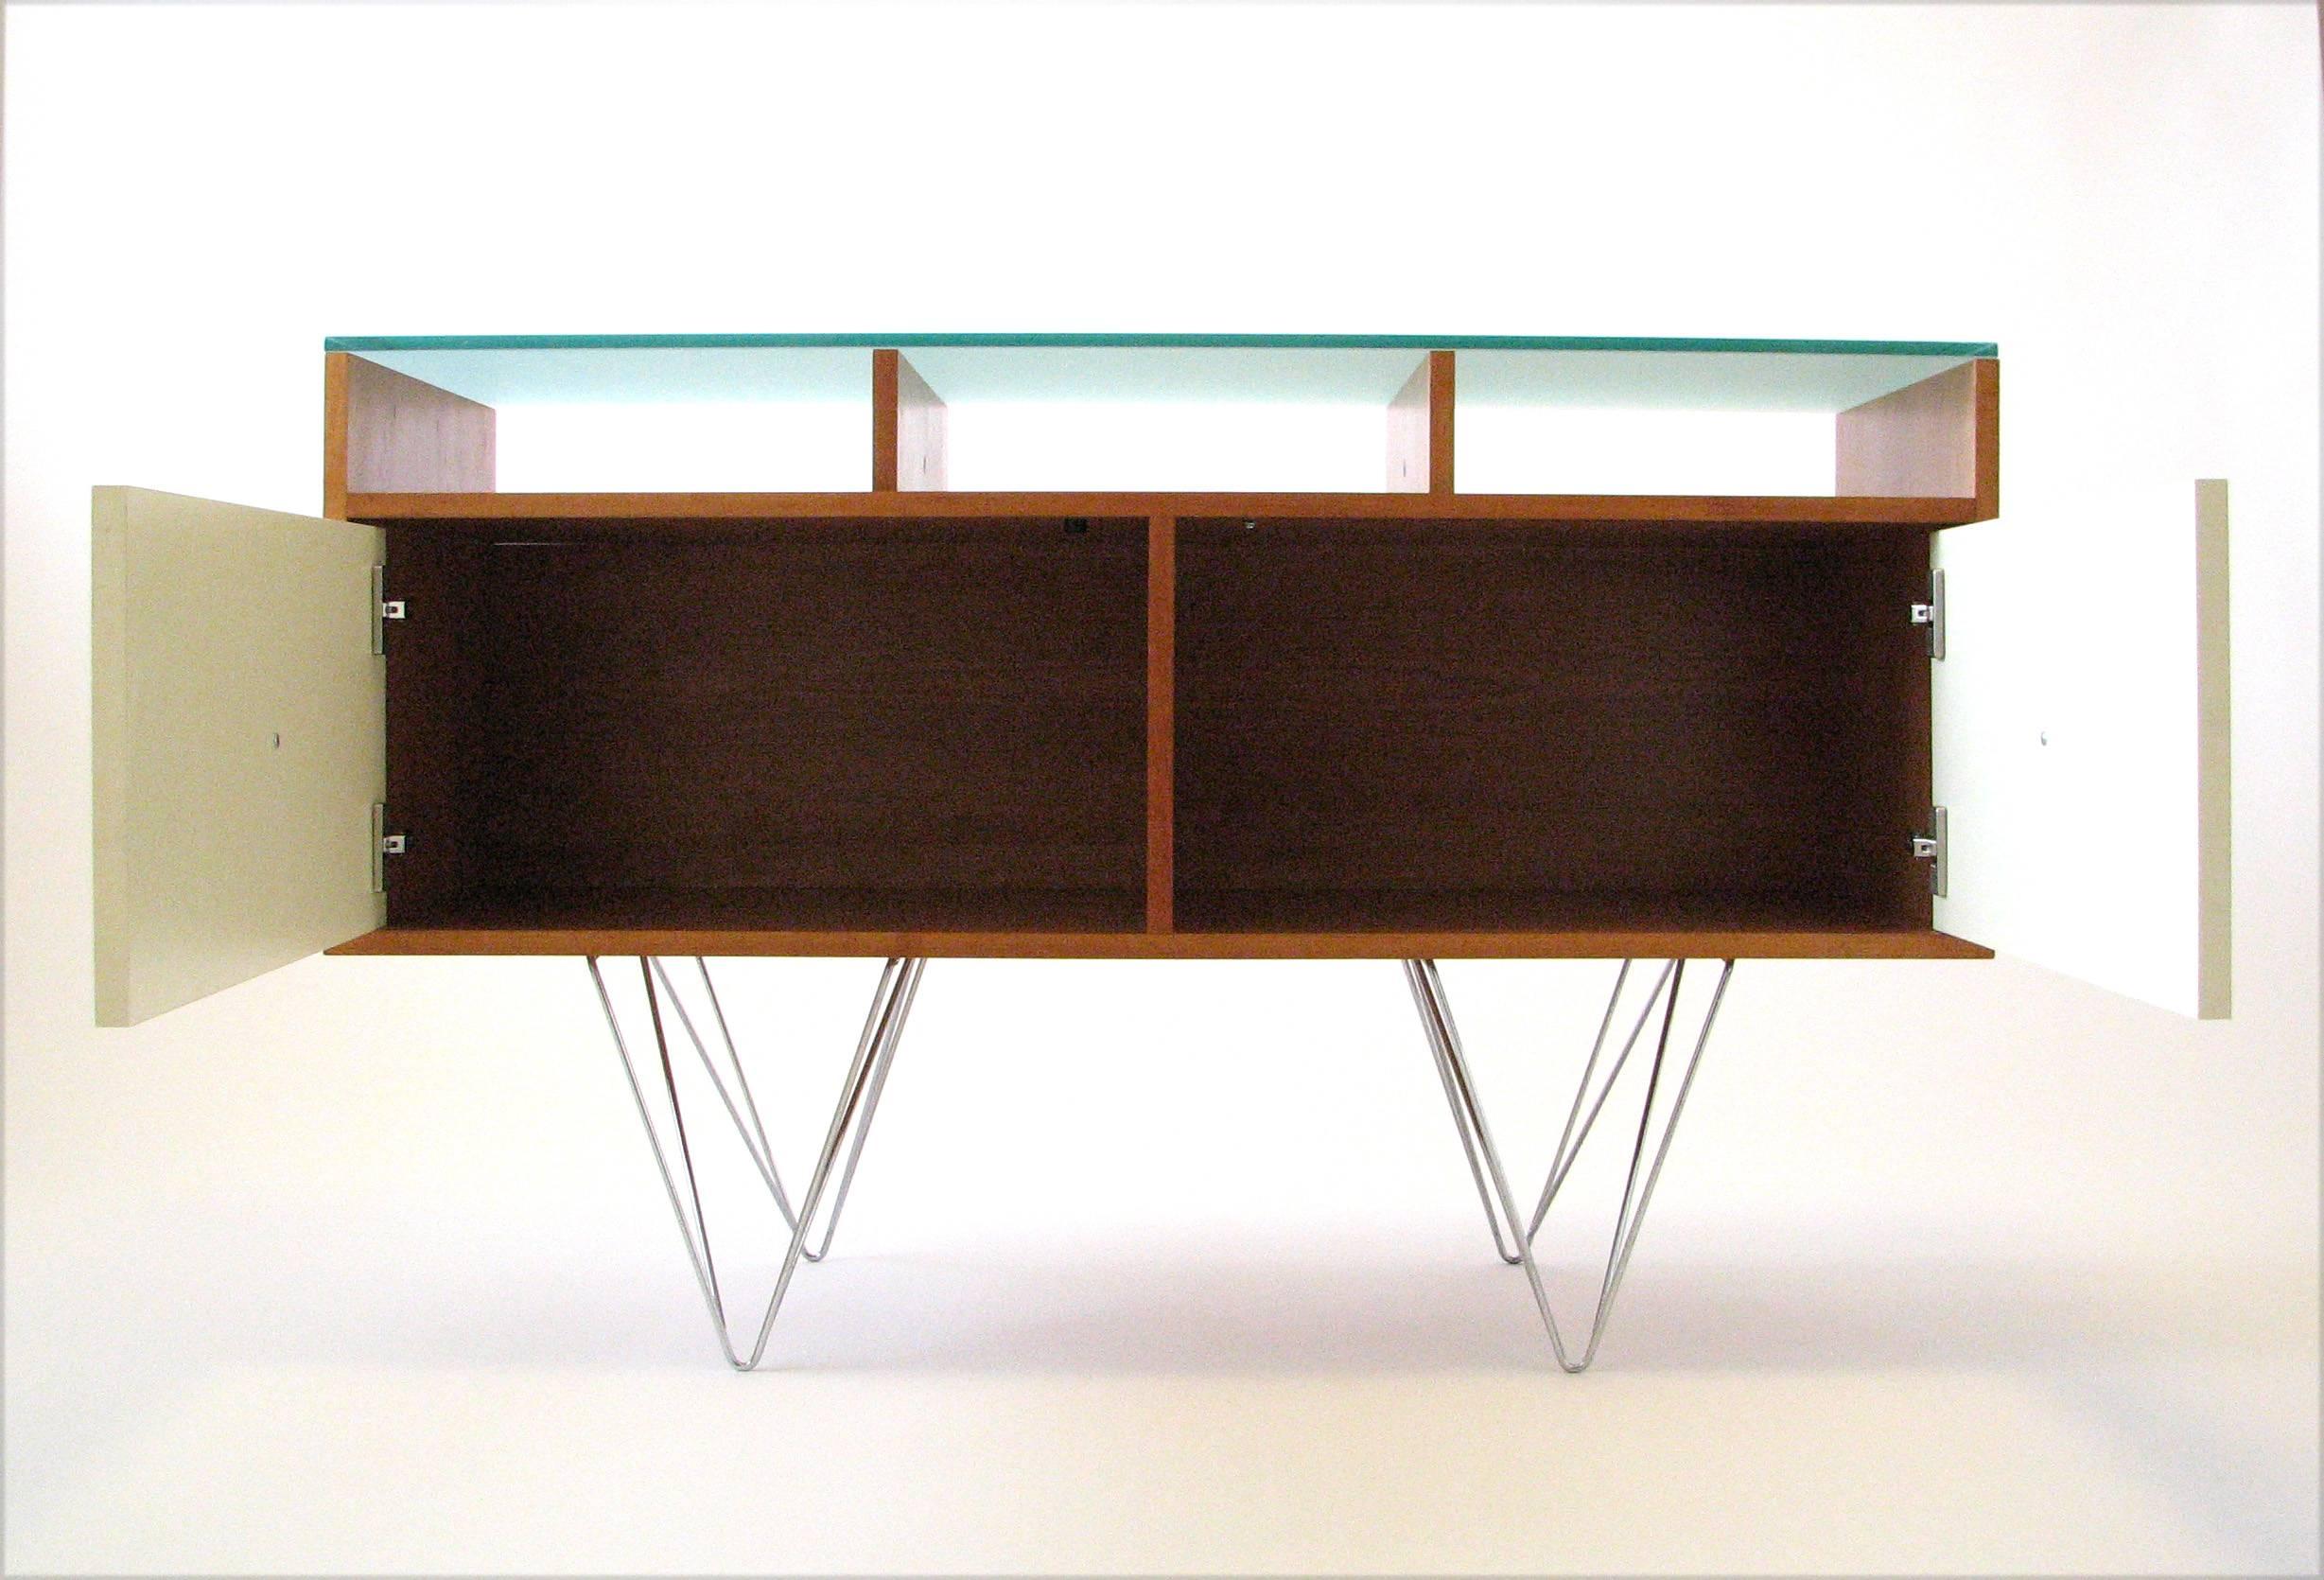 A cherrywood credenza or bar service cabinet with a frosted glass top over three open compartments, full-width storage behind two ivory melamine-wrapped doors, and chromed double hairpin legs. The finished cherry back makes it fully suitable for